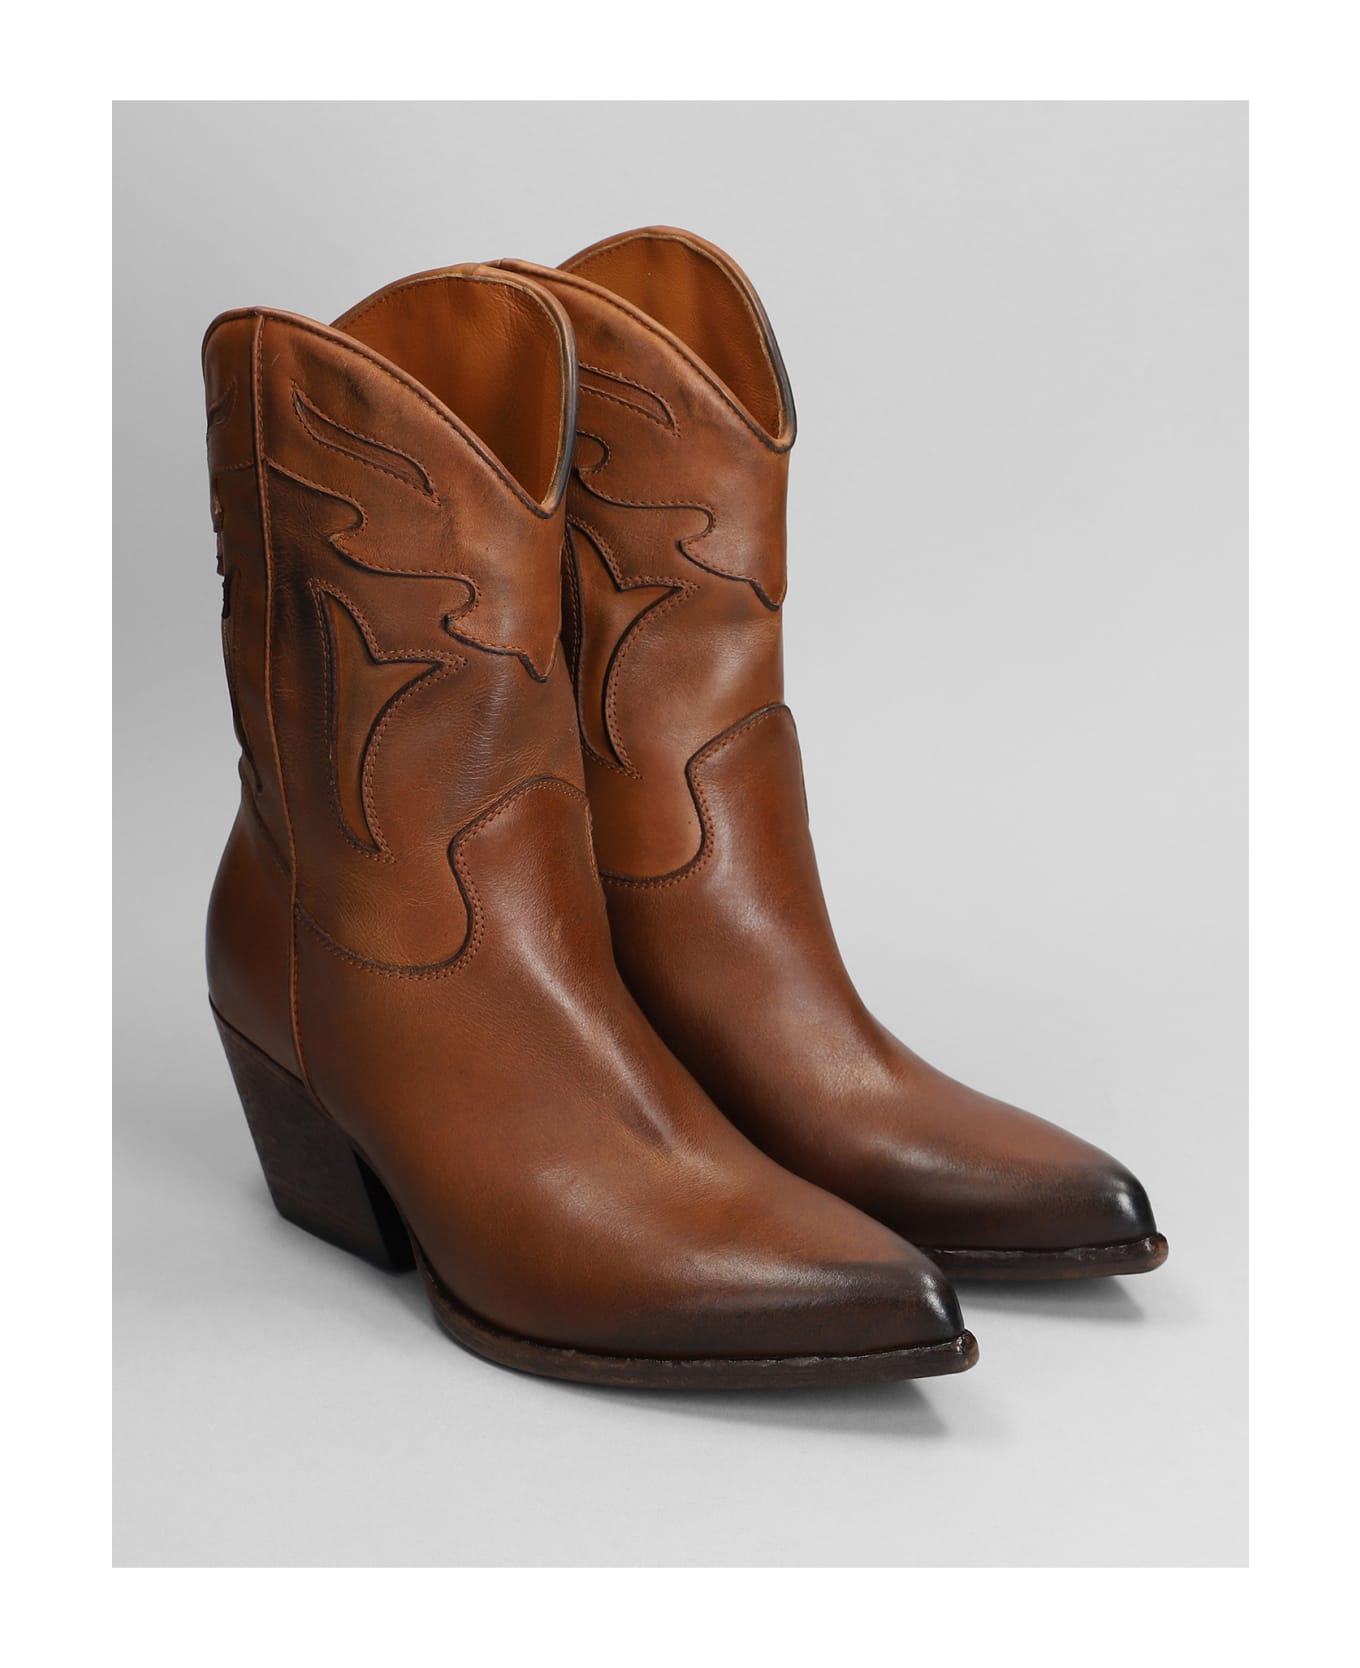 Elena Iachi Texan Ankle Boots In Leather G5180 Leather - leather G5180